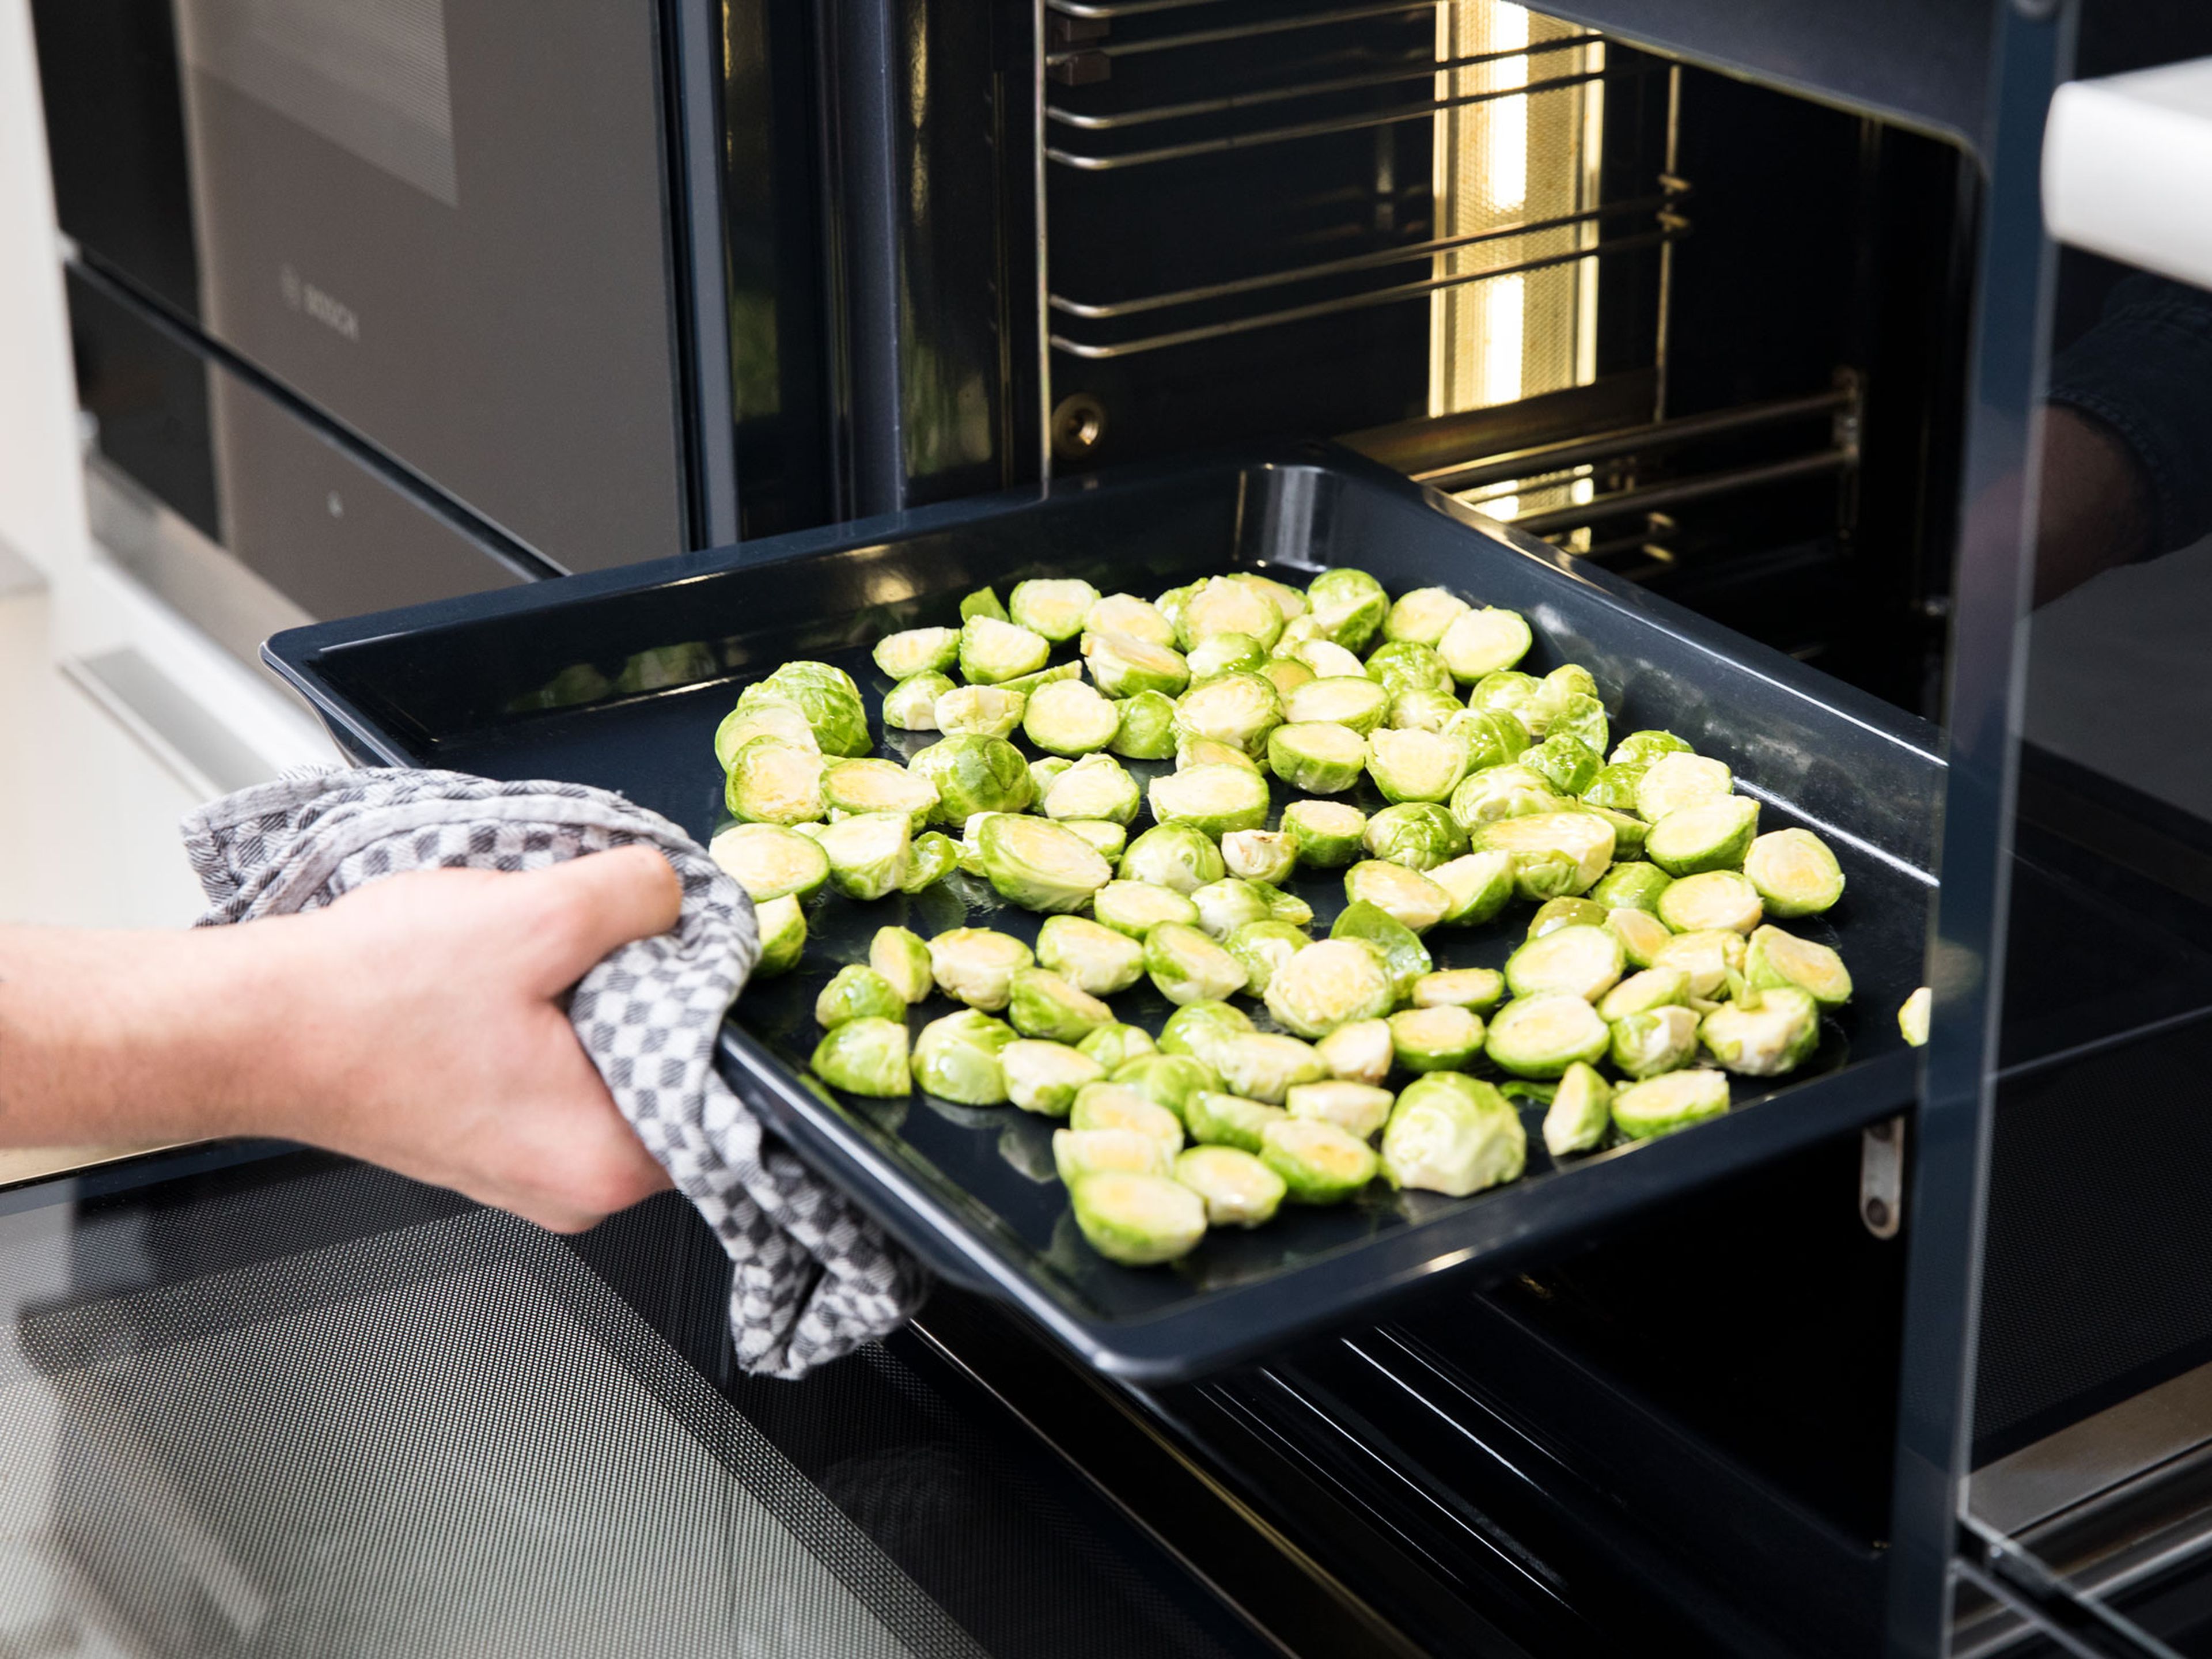 Preheat oven to 220°C/430°F. Halve Brussels sprouts and add to a bowl. Add most of the sesame oil, season with salt, and stir to combine. Transfer to a baking sheet and bake for approx. 20 min.